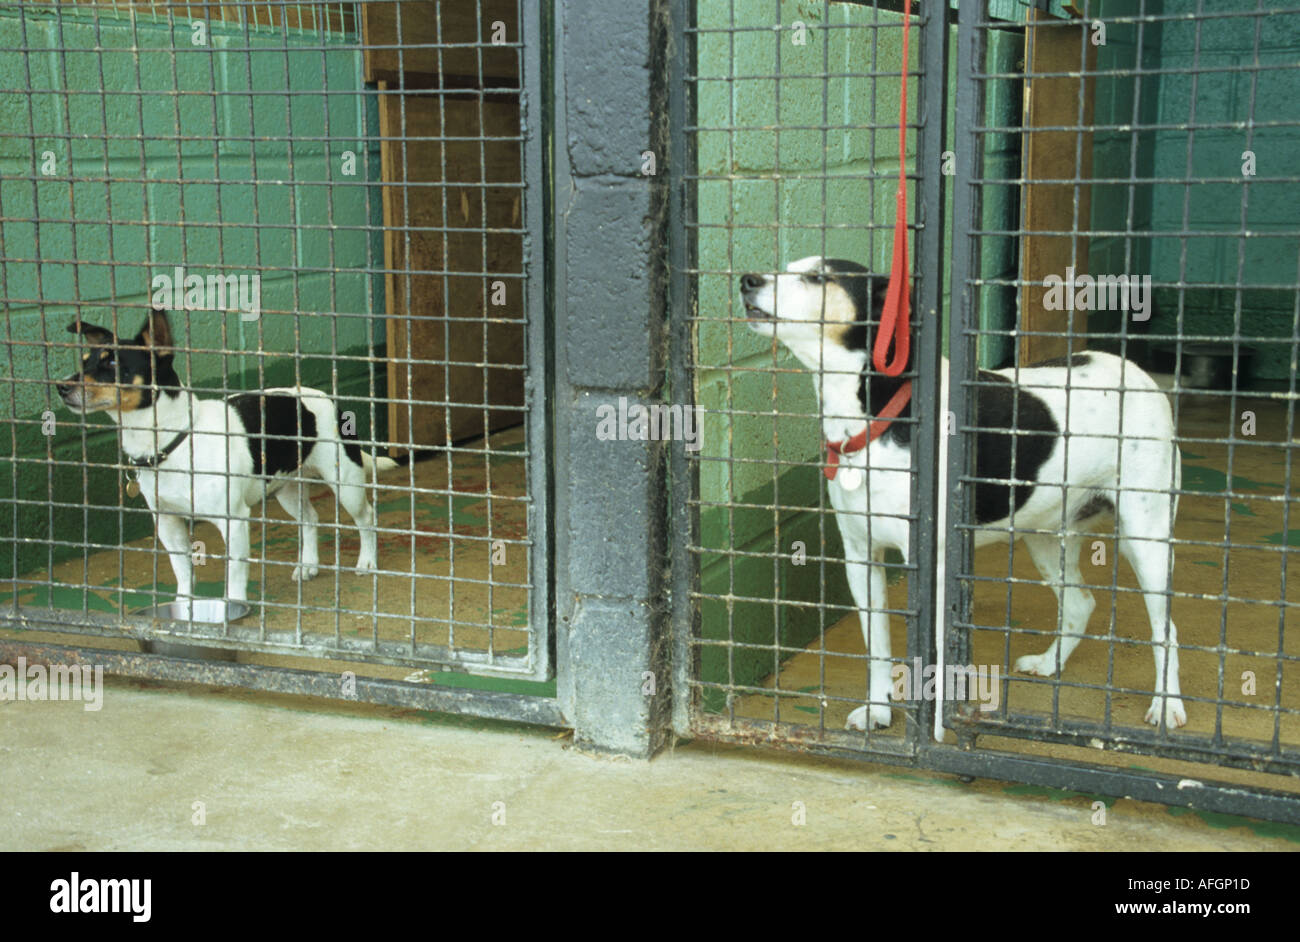 rehoming kennels